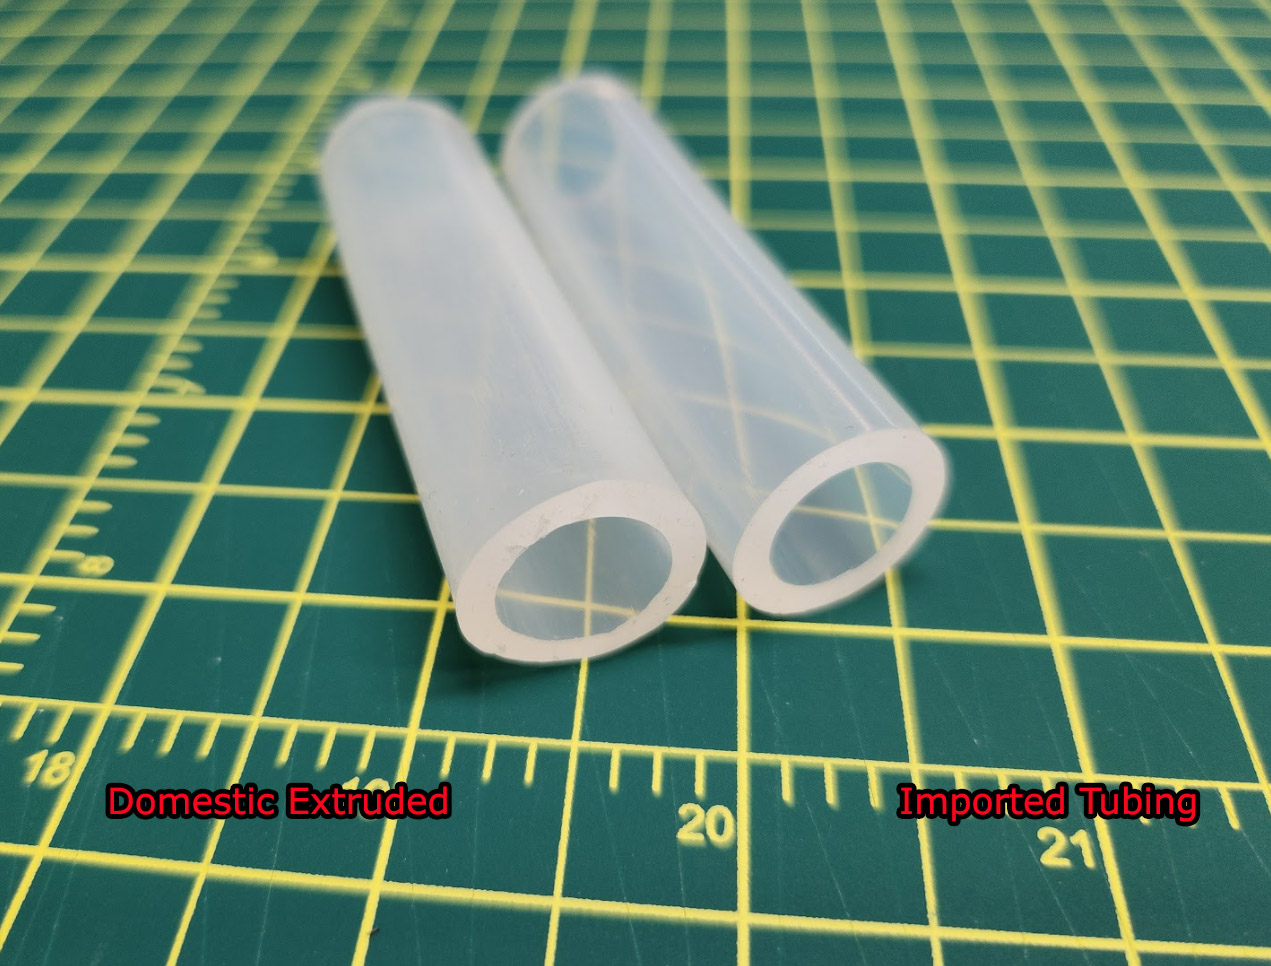 High temperature food-grade silicone tubing, 1/2 ID, 3/4 OD (Sold by -  The Electric Brewery